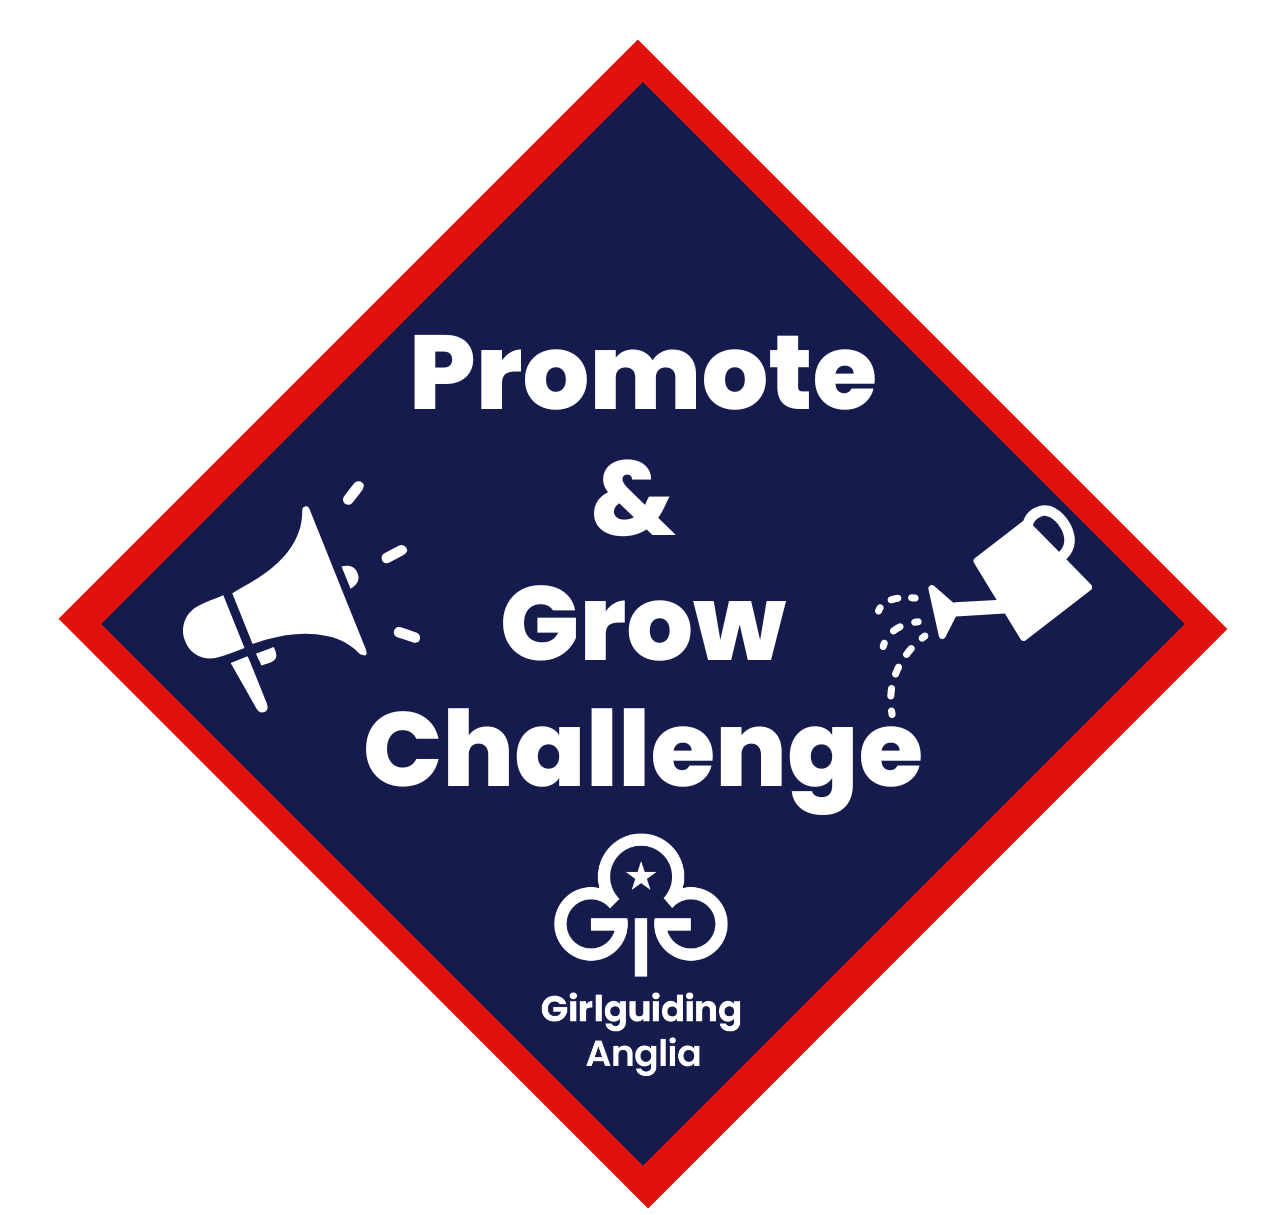 image relating to Promote and Grow Challenge